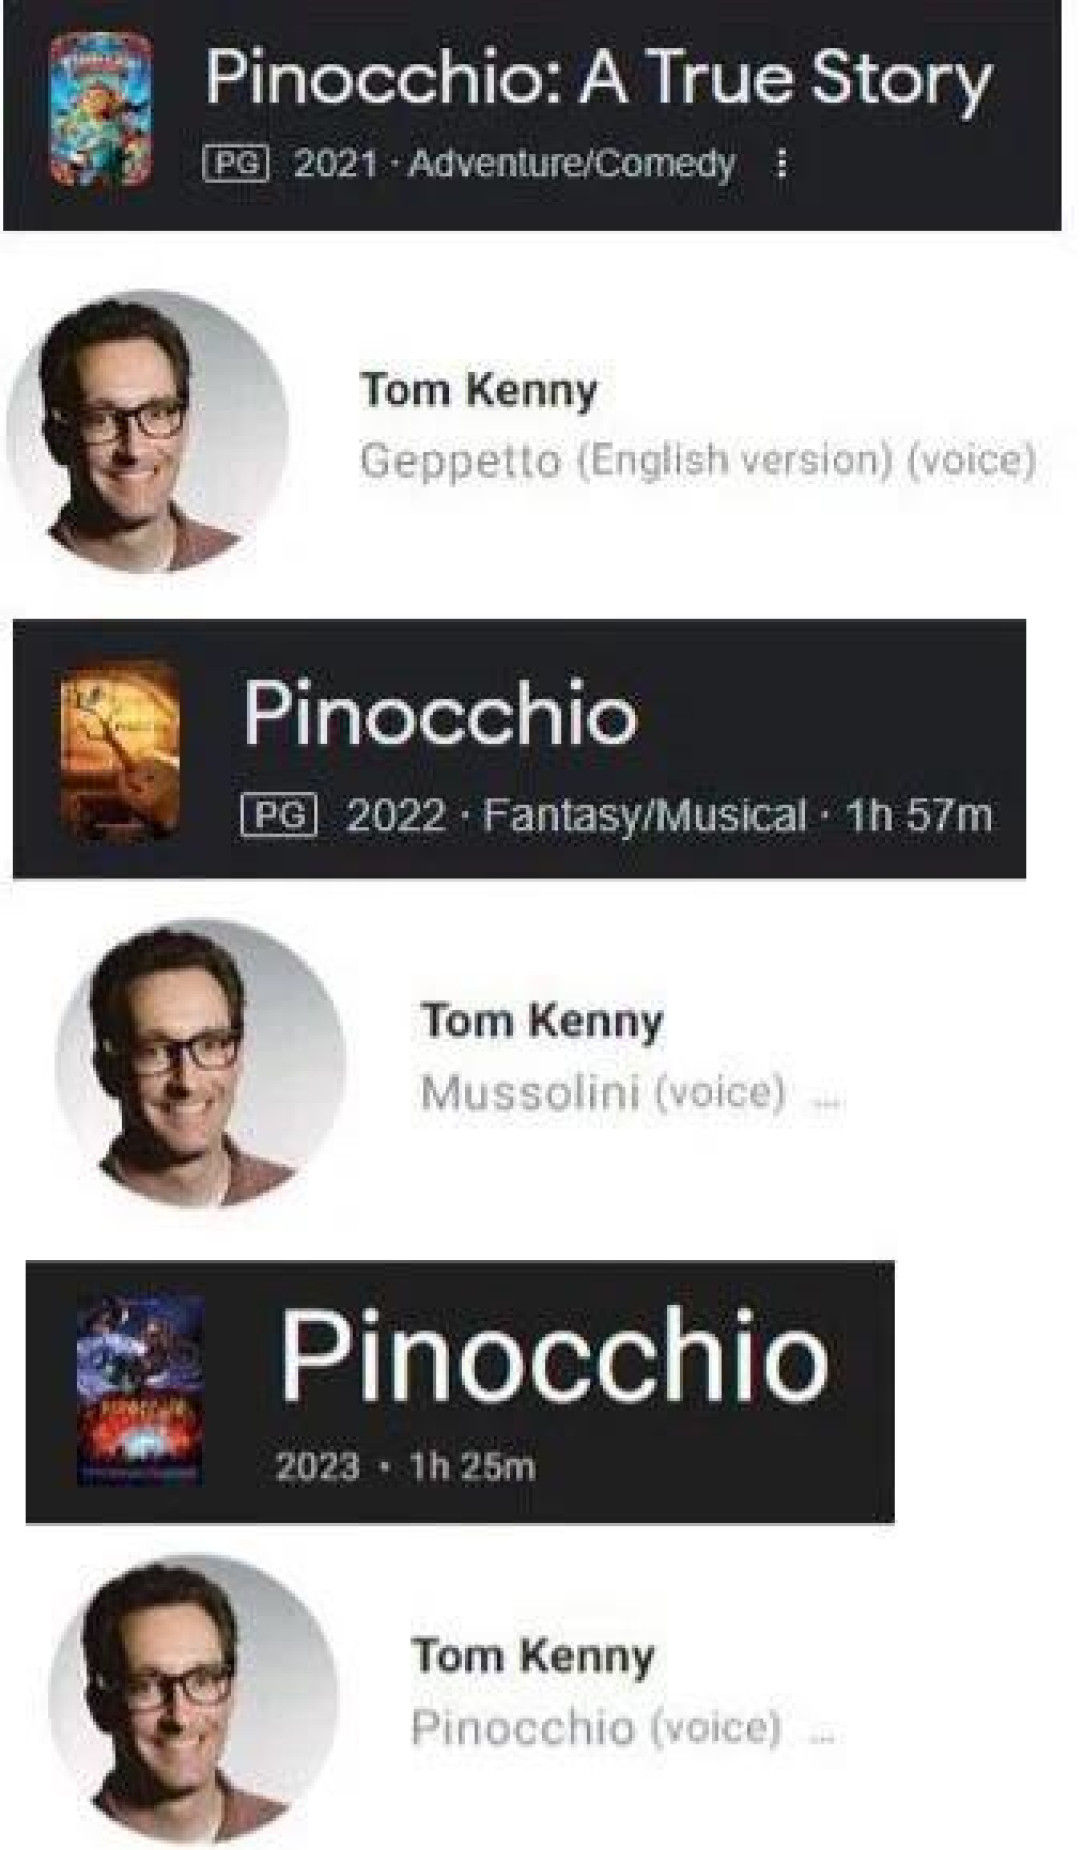 Tom Kenny the pinocchio puppet master